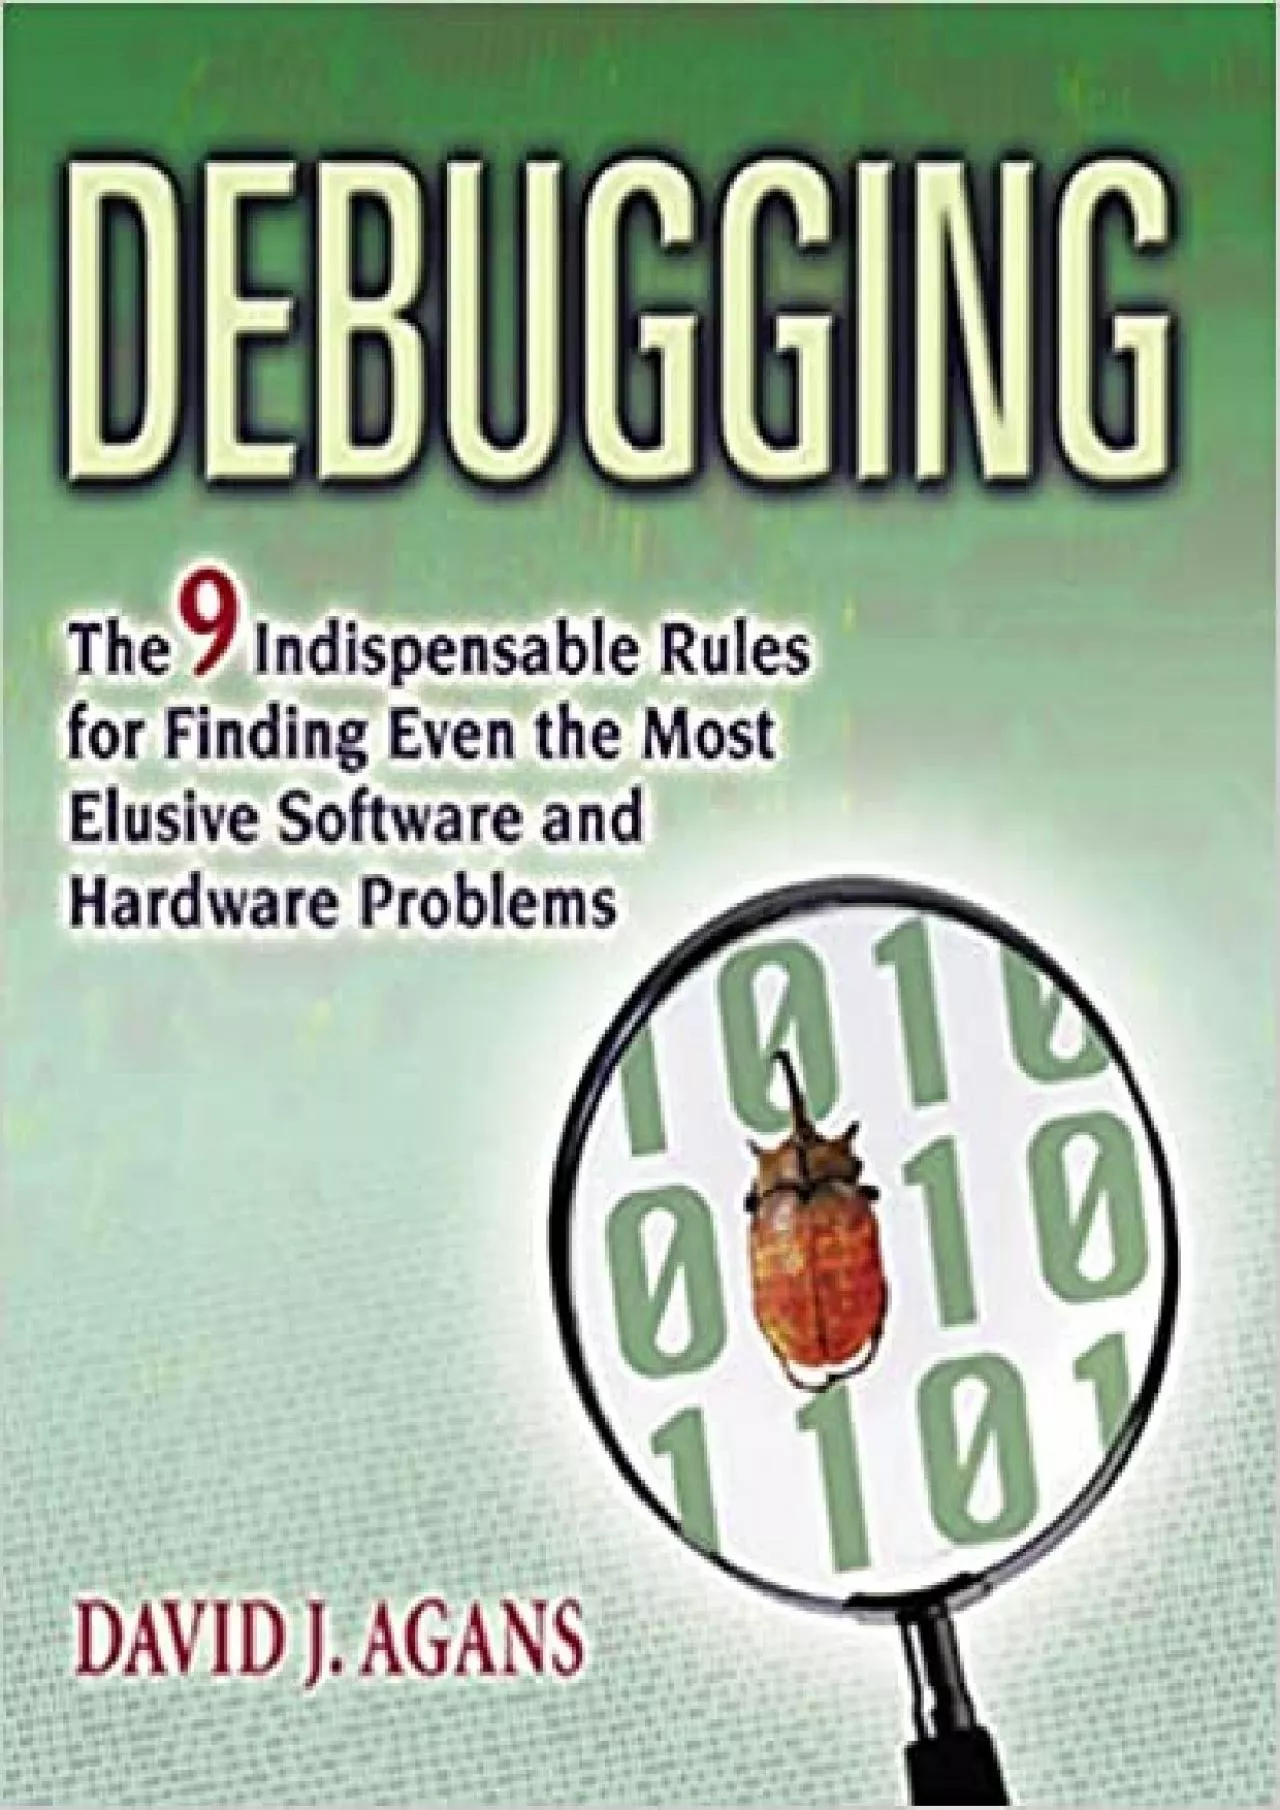 Debugging: The 9 Indispensable Rules for Finding Even the Most Elusive Software and Hardware